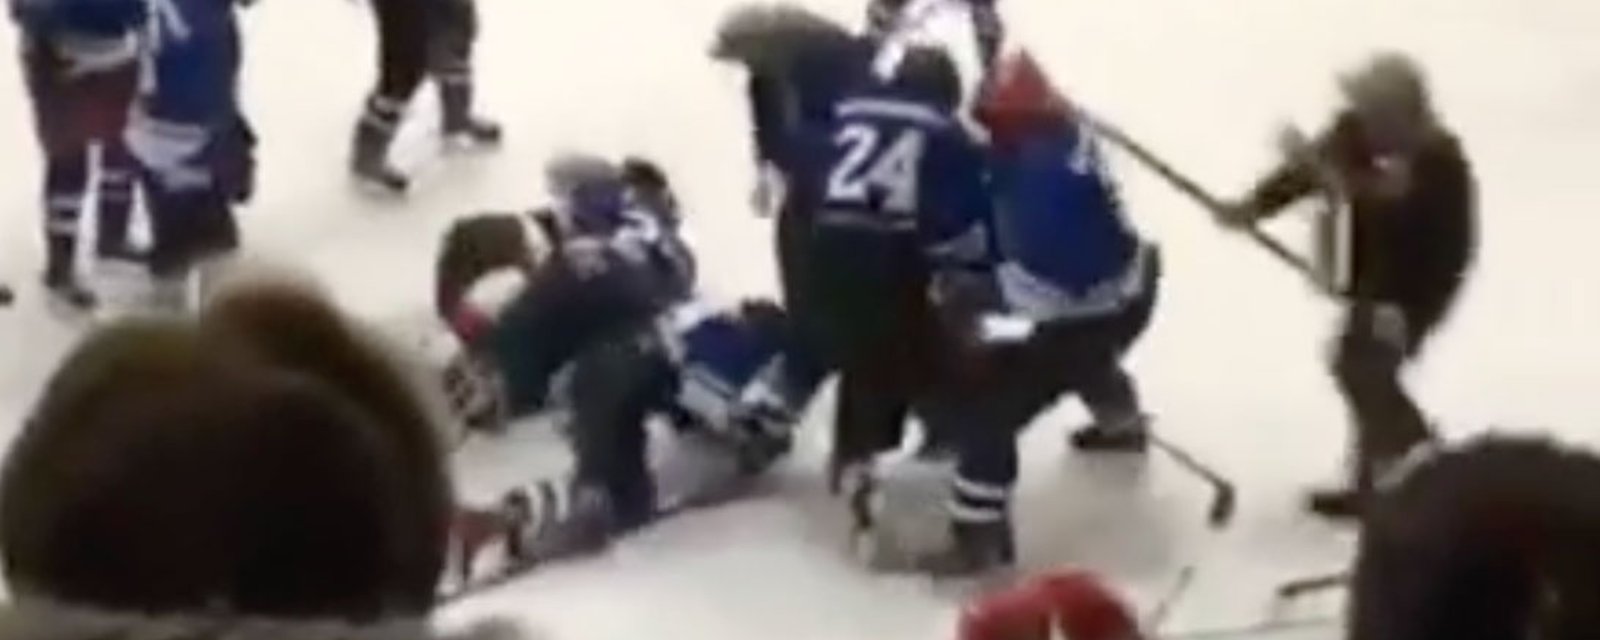 Coach attacks player with a stick then gets destroyed by one of his teammates! 